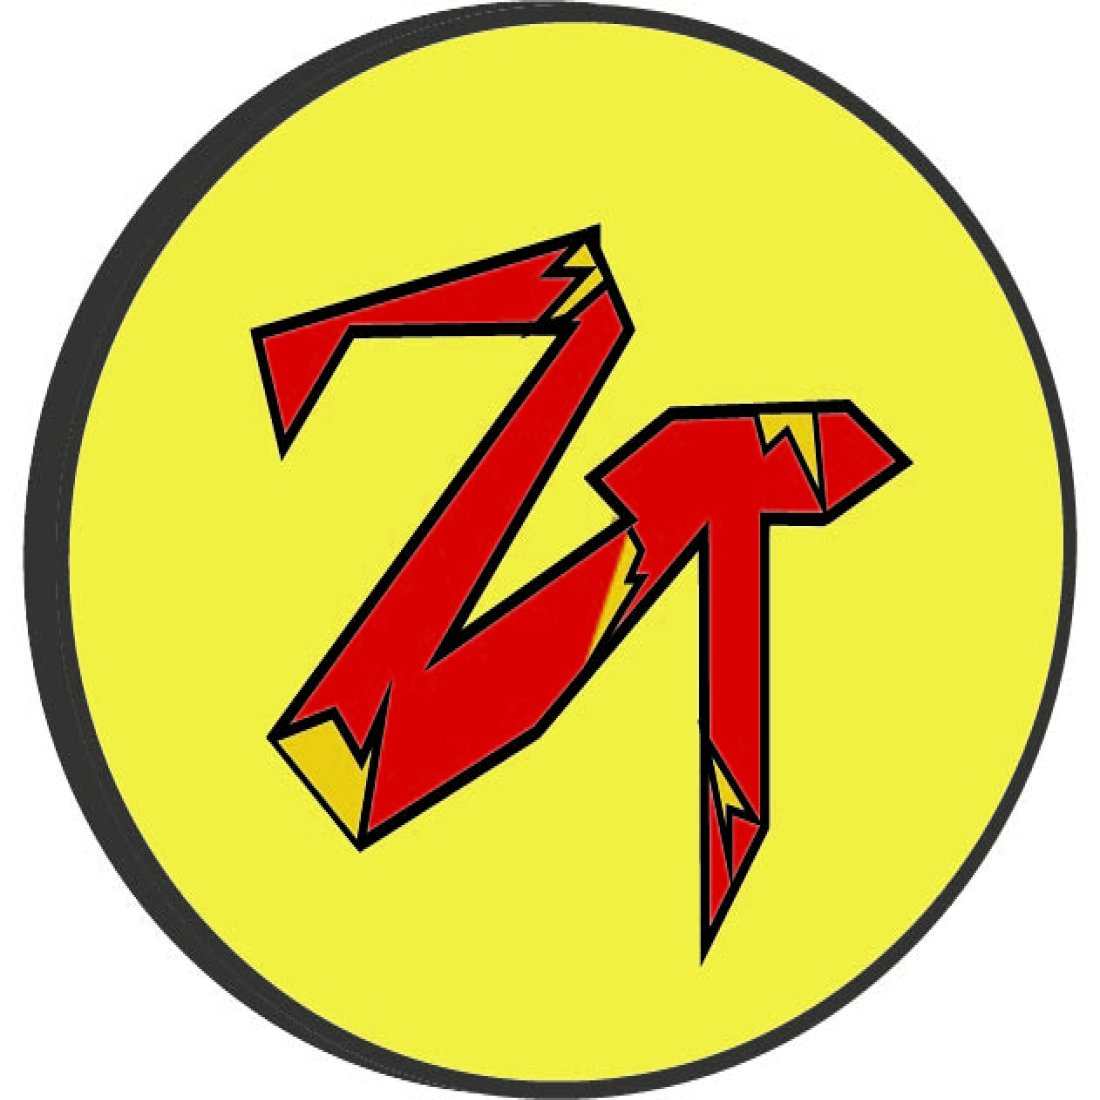 ZT LOGO for gaming or TECH preview image.